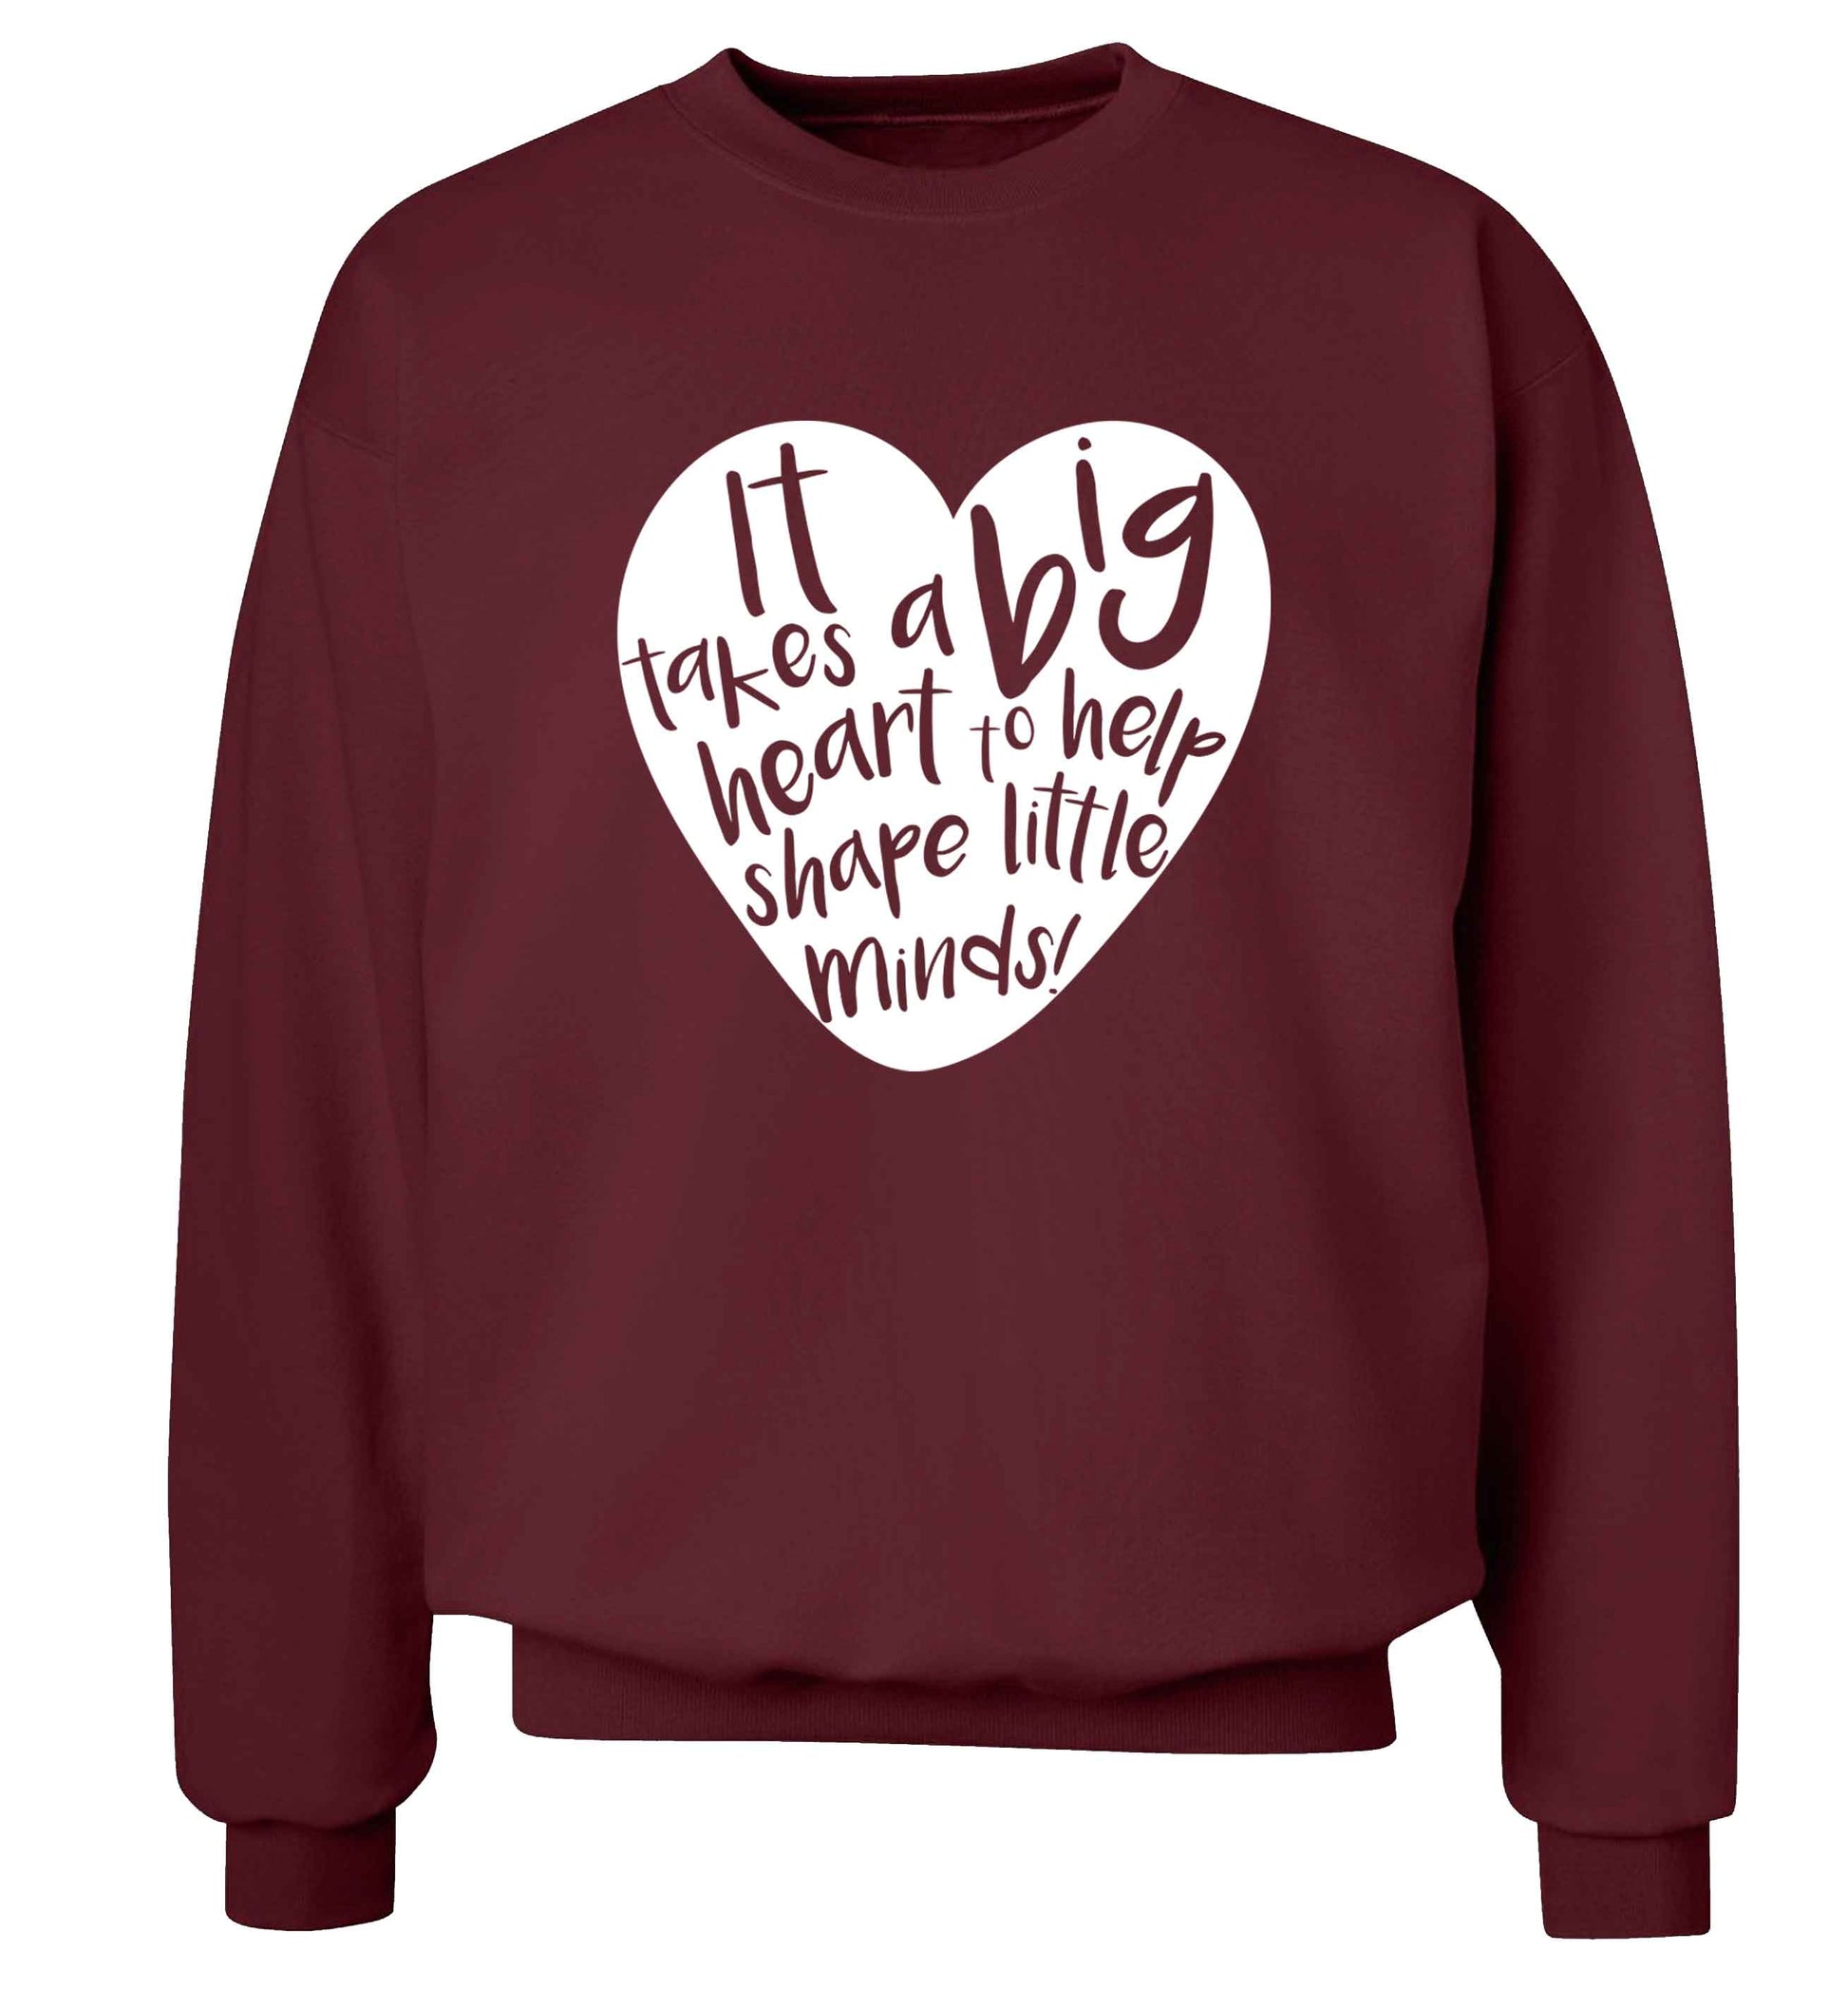 It takes a big heart to help shape little minds adult's unisex maroon sweater 2XL